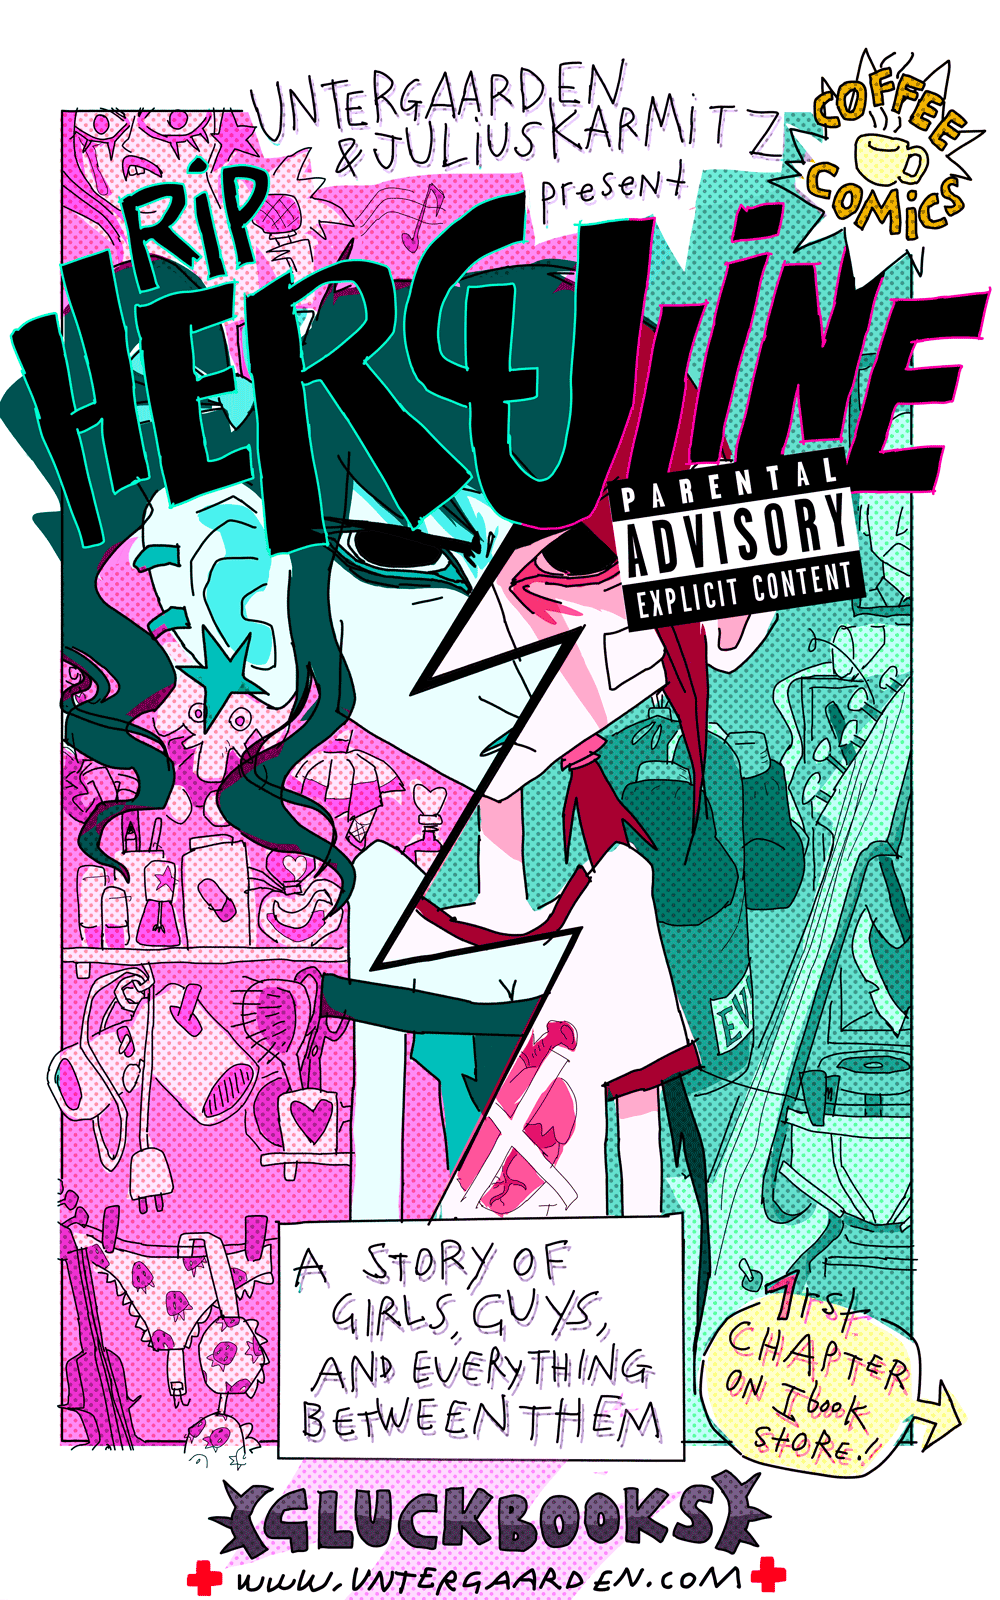 Sooo Ladies and Gentlemen and everyone in between, here comes the first Comix by Untergaarden and Julius Karmitz: R.I.P Herculine ! A story of girls, guys, and everything between them. Edited by Gluckbooks, 1rst chapter soon to be available !!